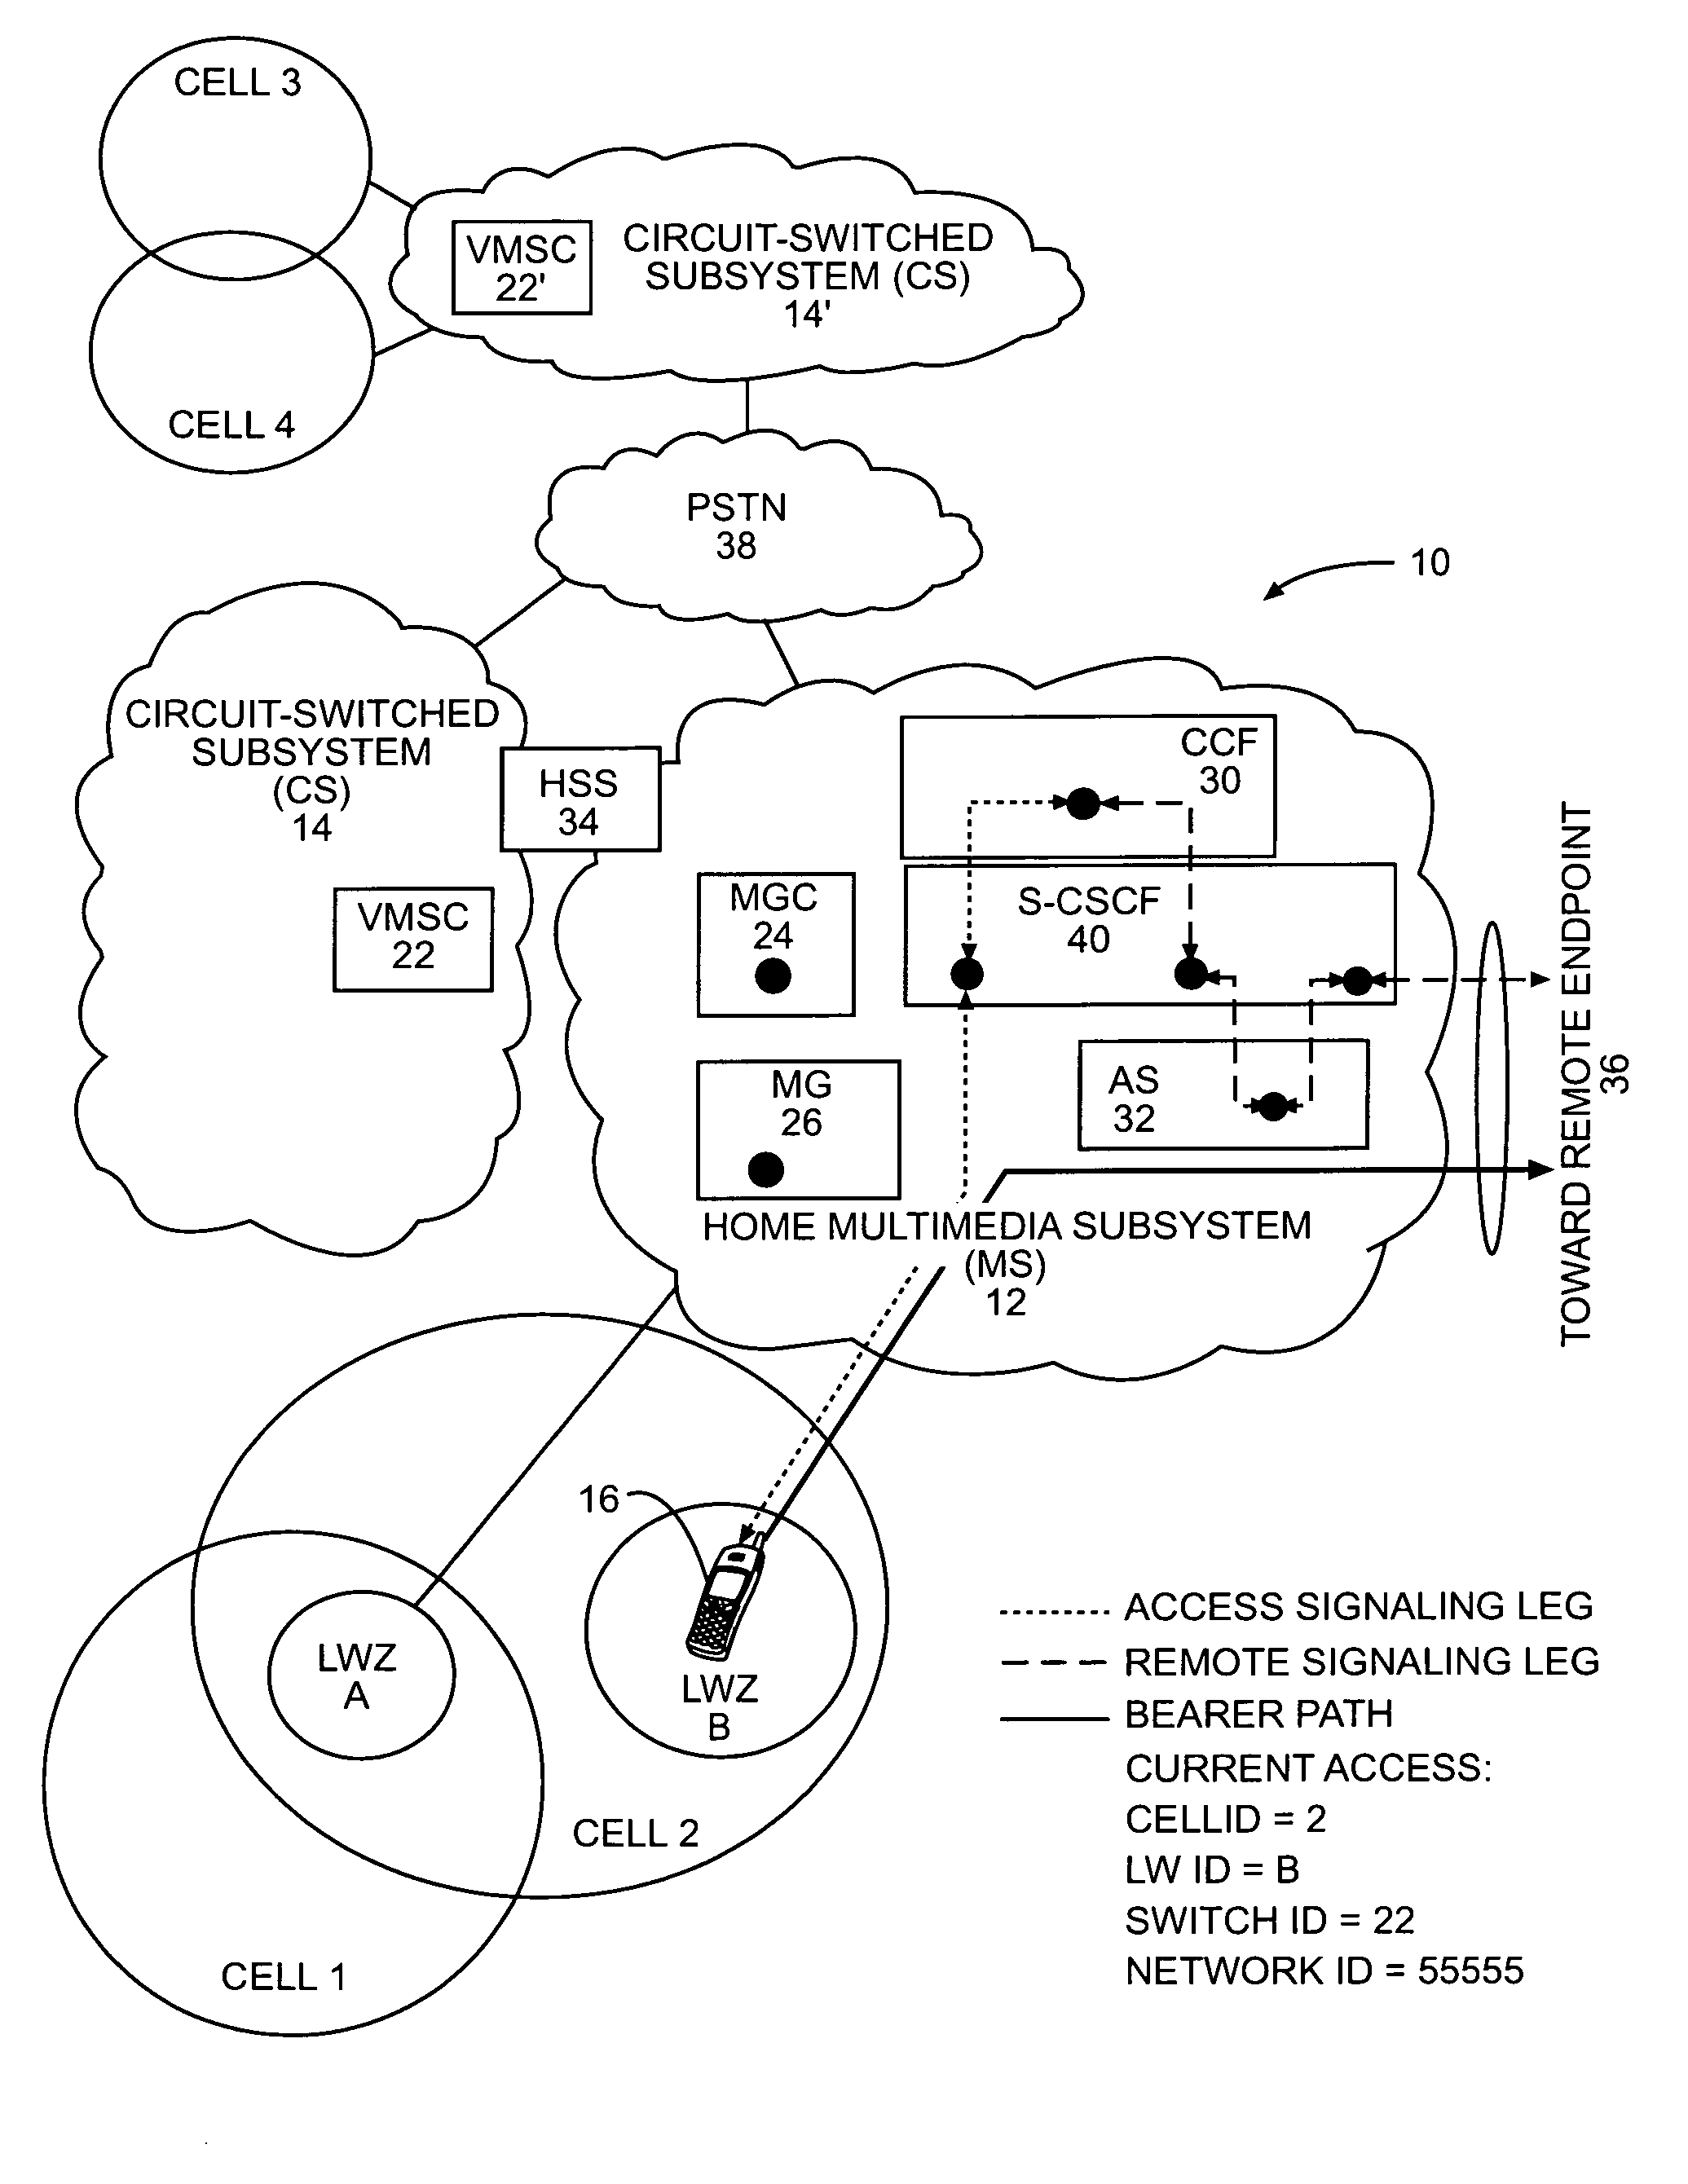 Selective call anchoring in a multimedia subsystem